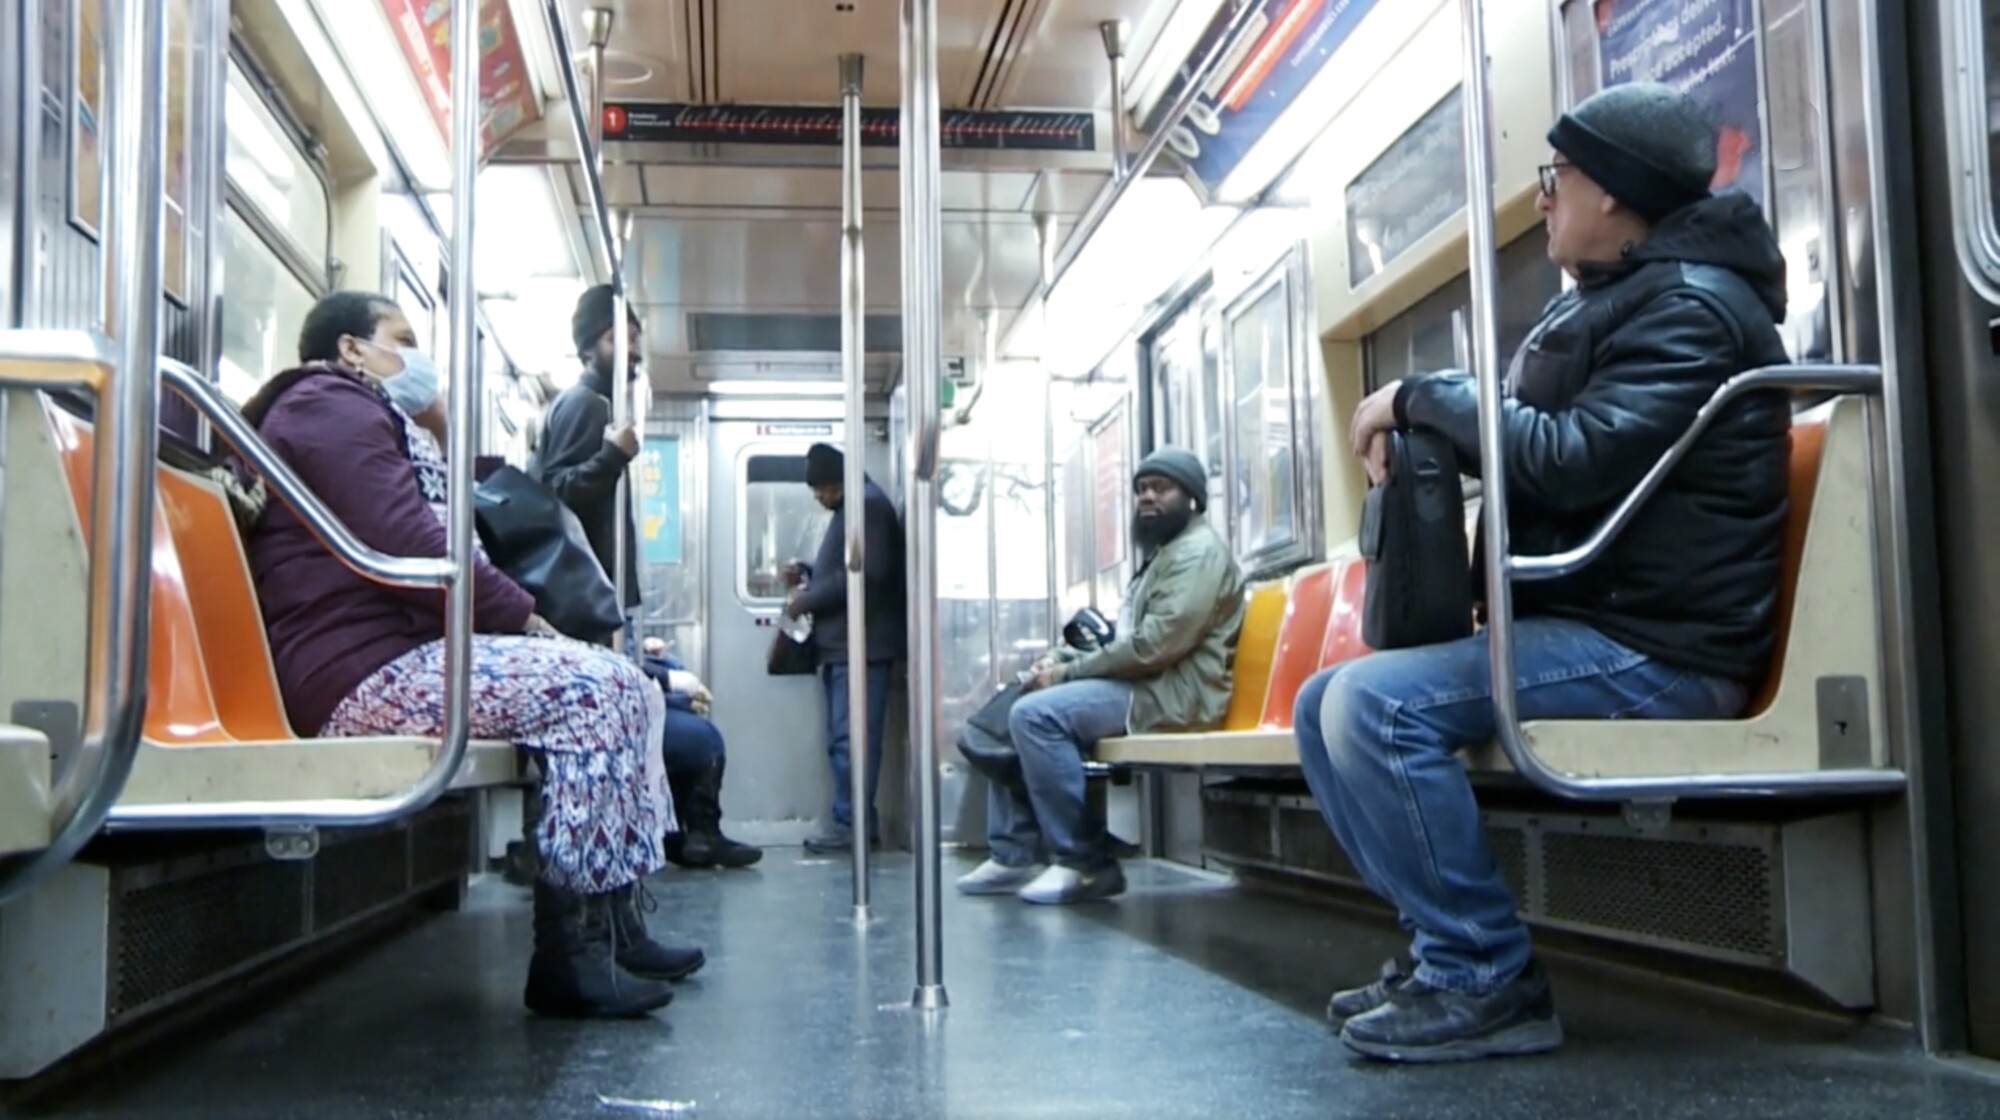 NYC Stops Using Chinese Cameras on Subways